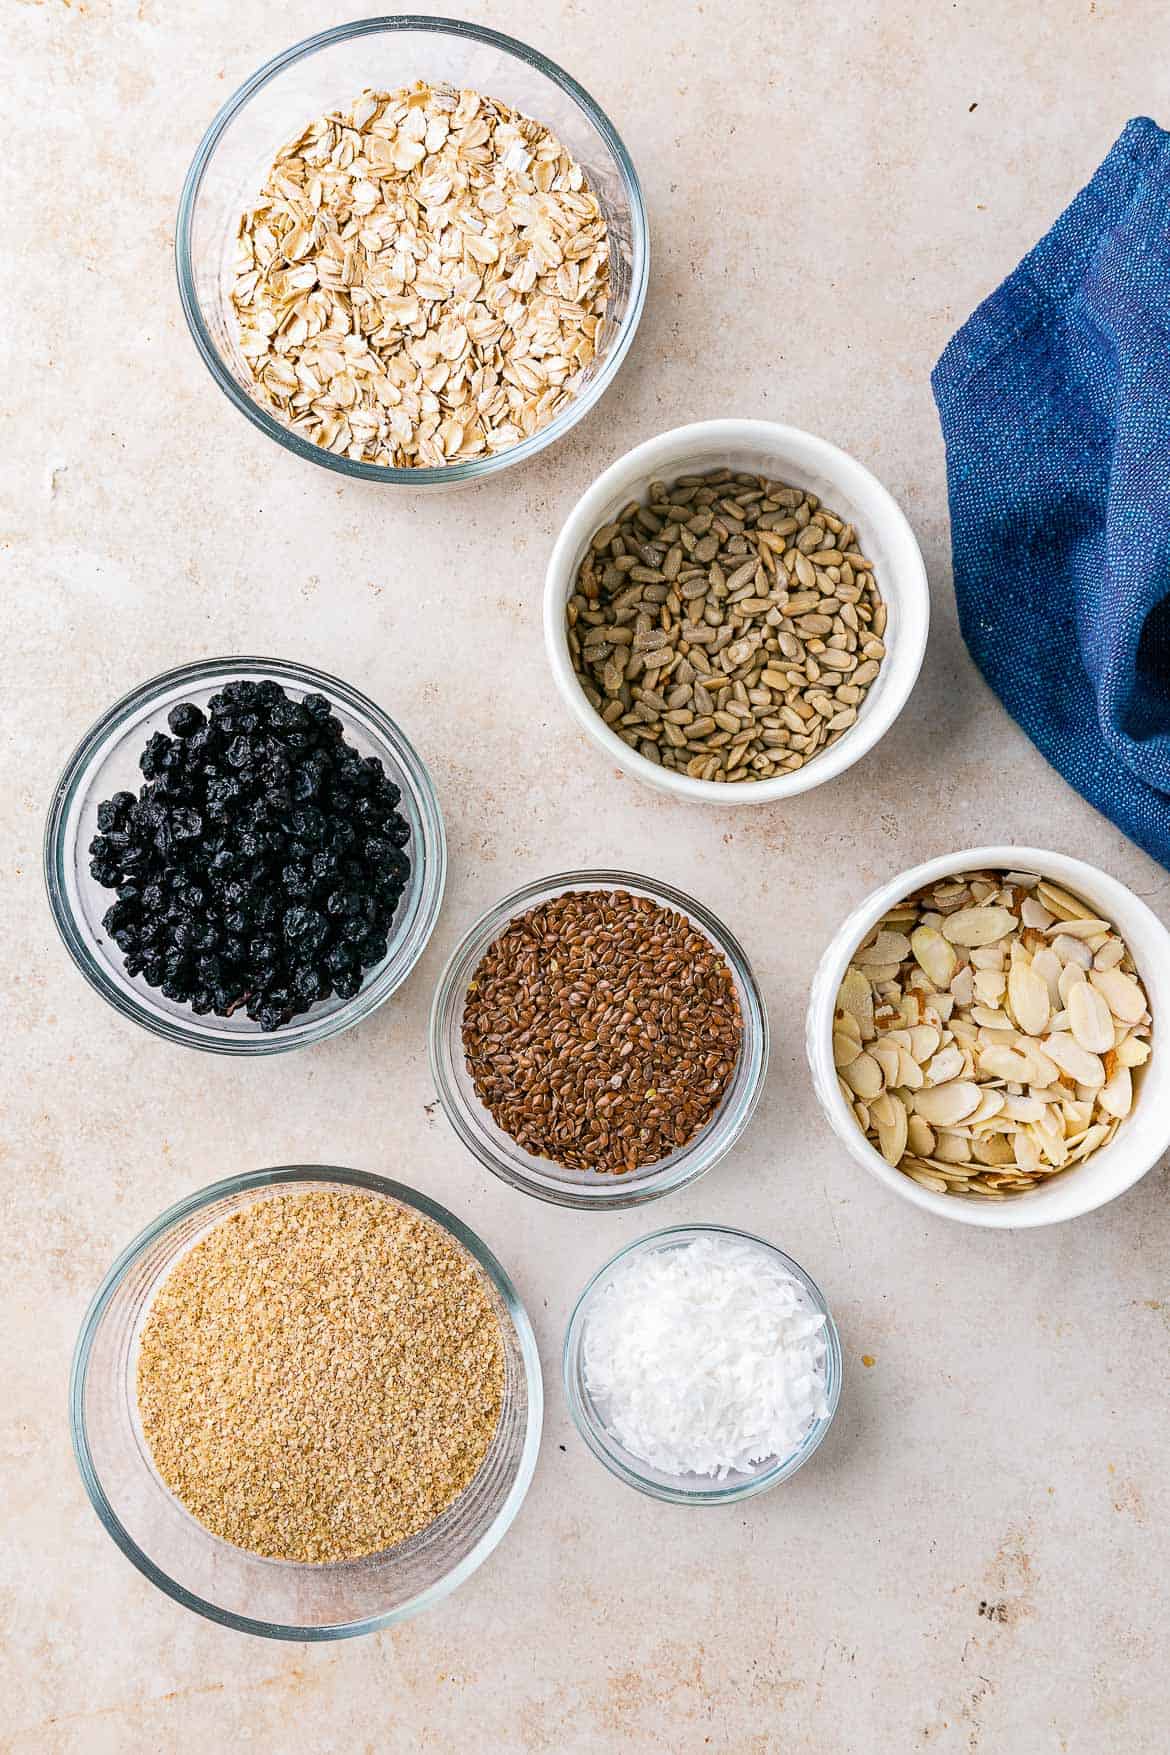 White bowls filled with ingredients to make homemade muesli, like oats, dried blueberries, and flaxseed meal.